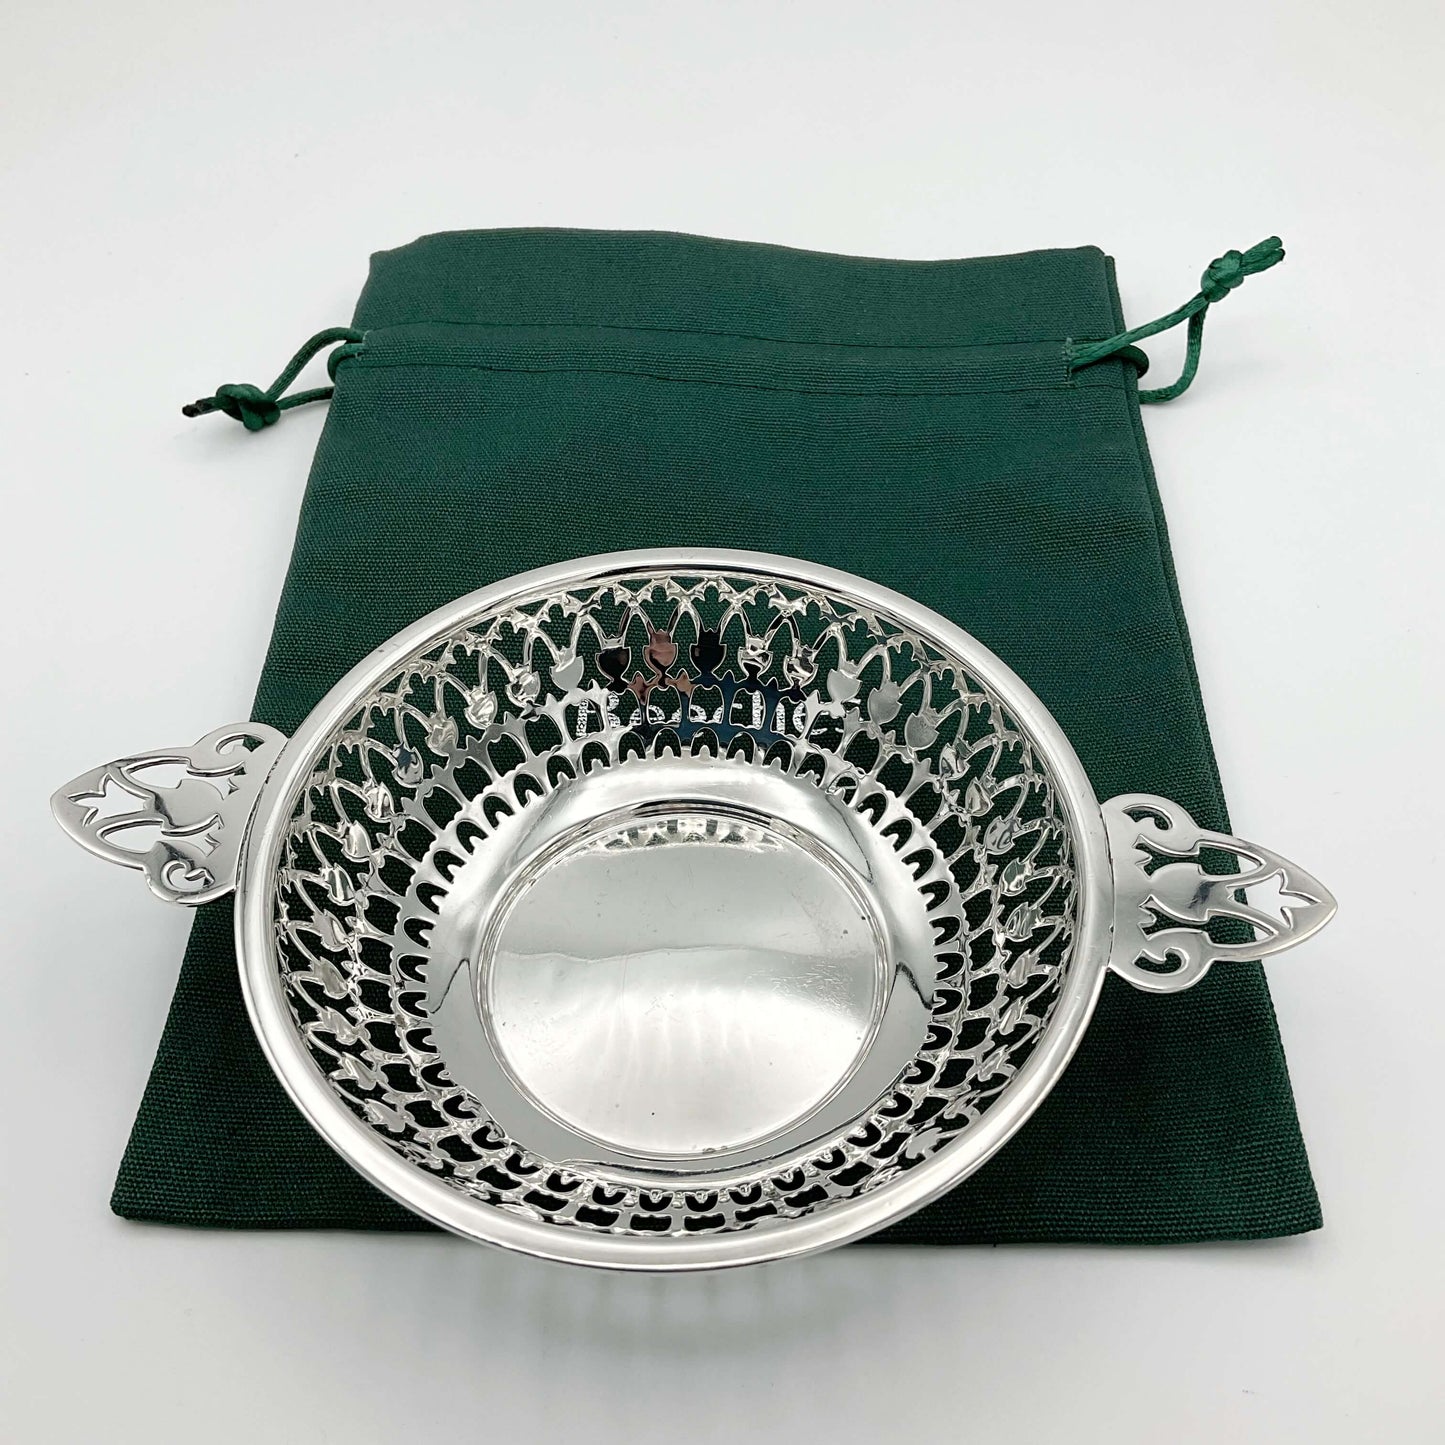 Shiny silver pierced bowl with handles on green cotton gift  bag